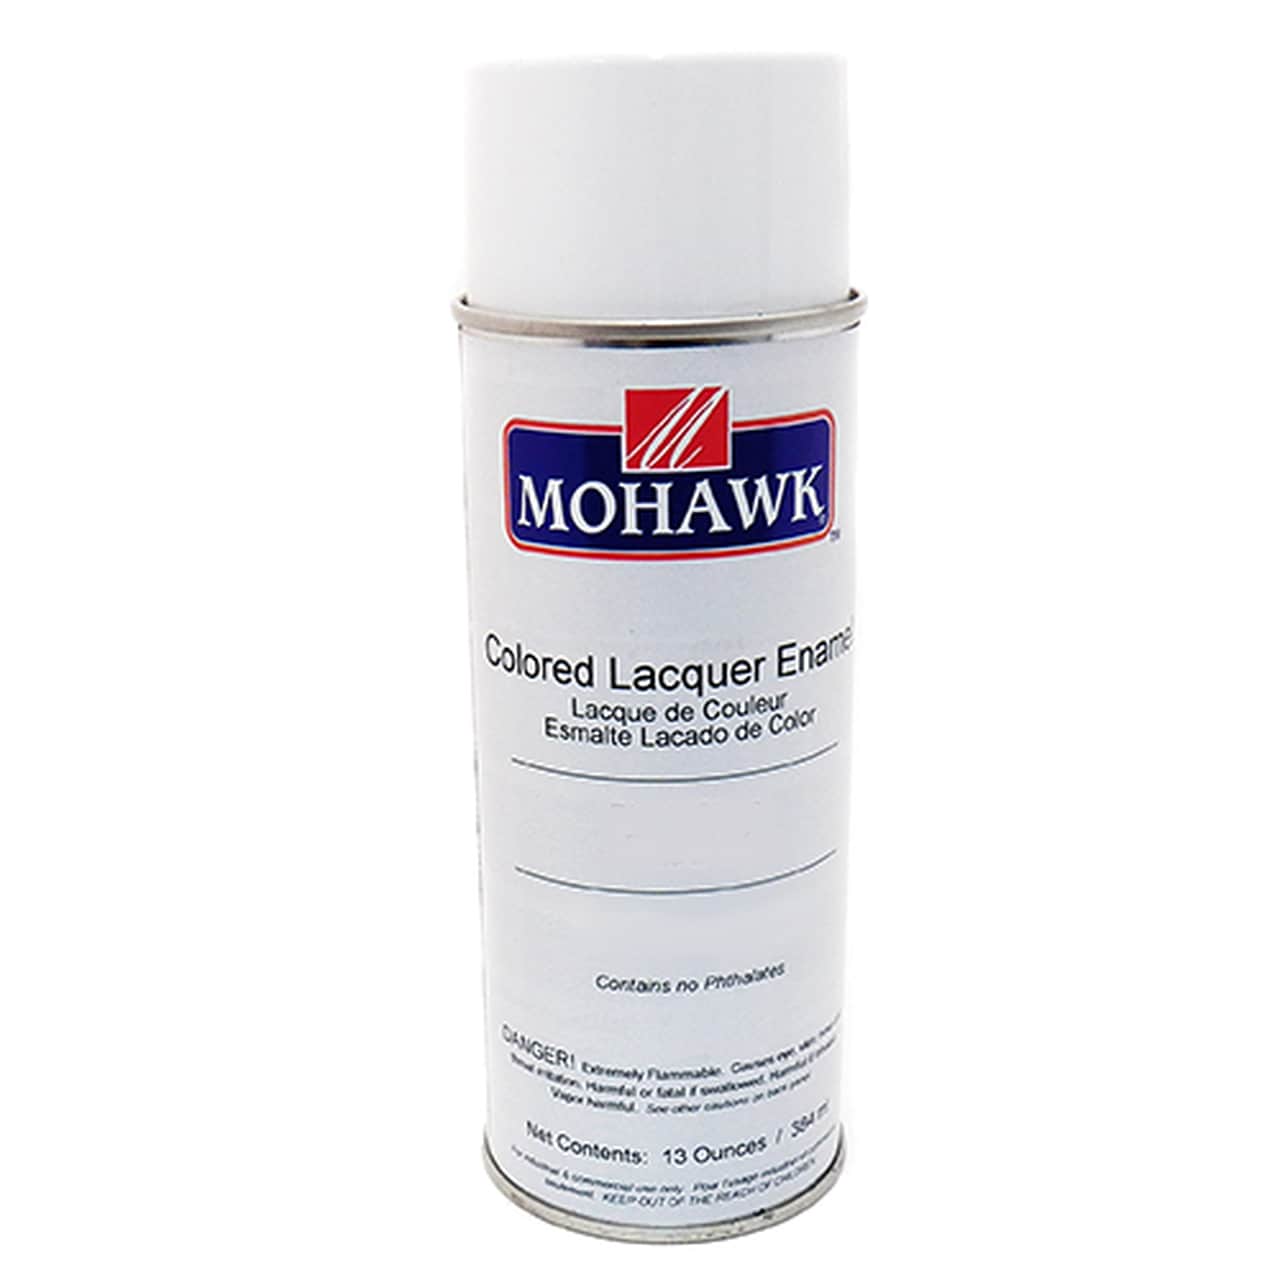 Mohawk Pull Up Leather Care Kit